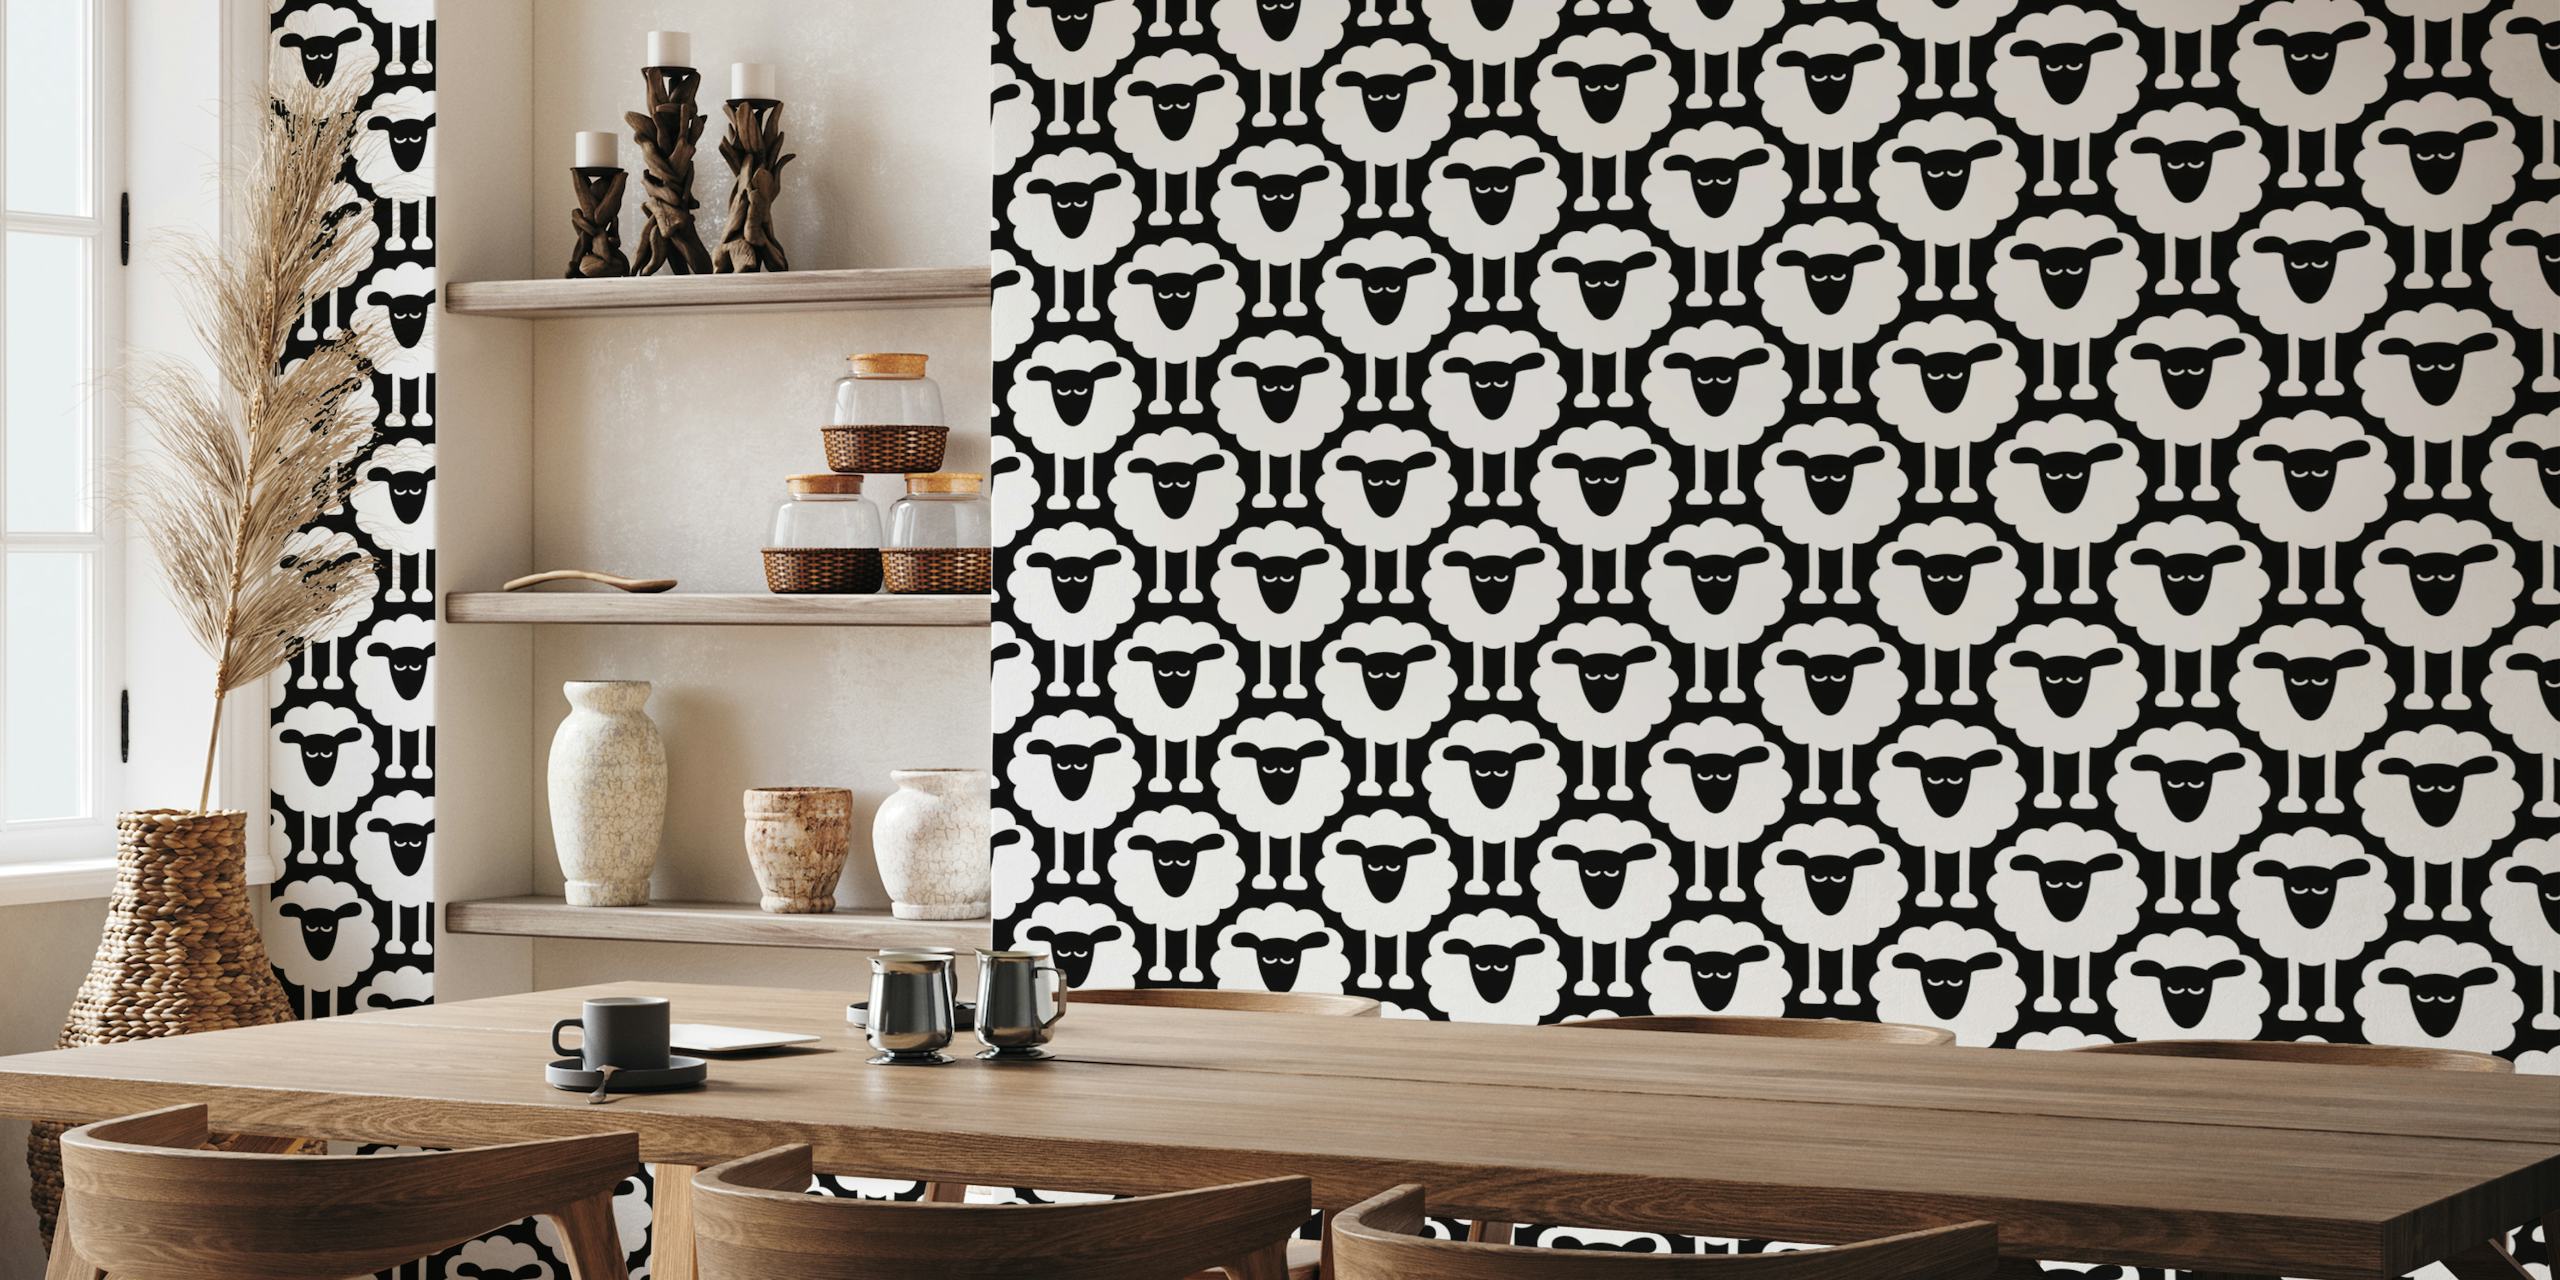 2693 D - black and white sheep pattern wallpaper